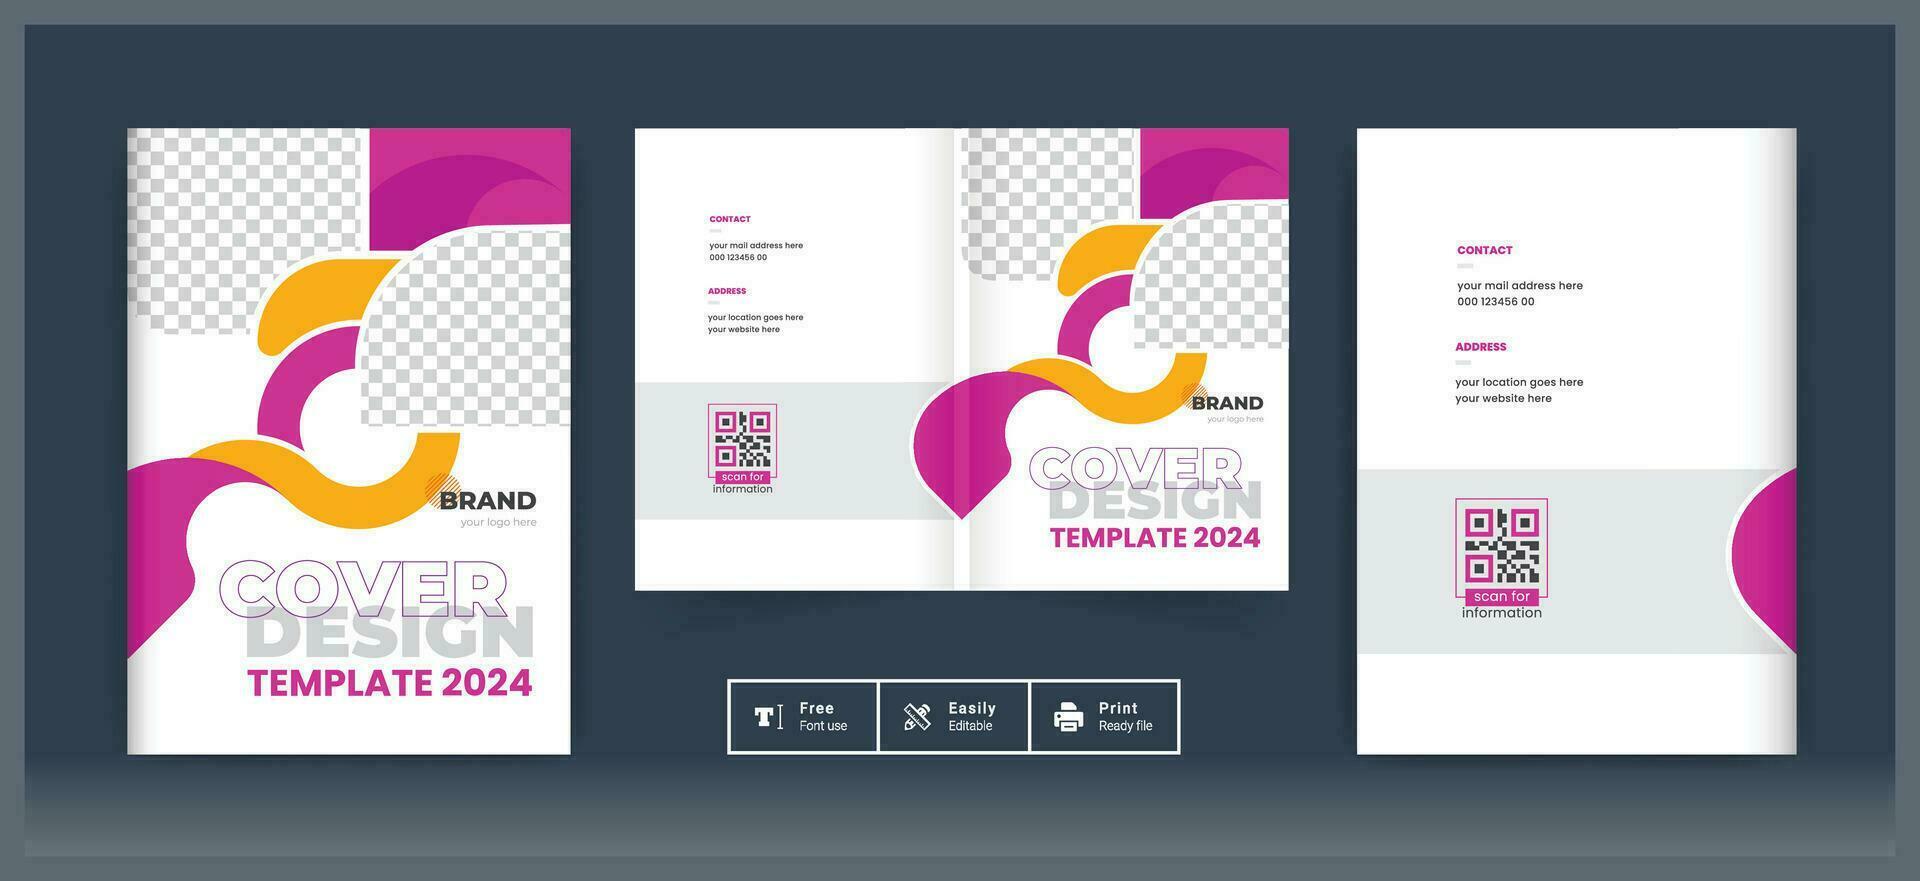 Corporate Business Brochure Cover Design Template in A4. Can be adapt to Bi fold Brochure, Annual Report, Magazine Cover, Poster, Business Presentation, Portfolio cover, Flyer, Booklet cover vector